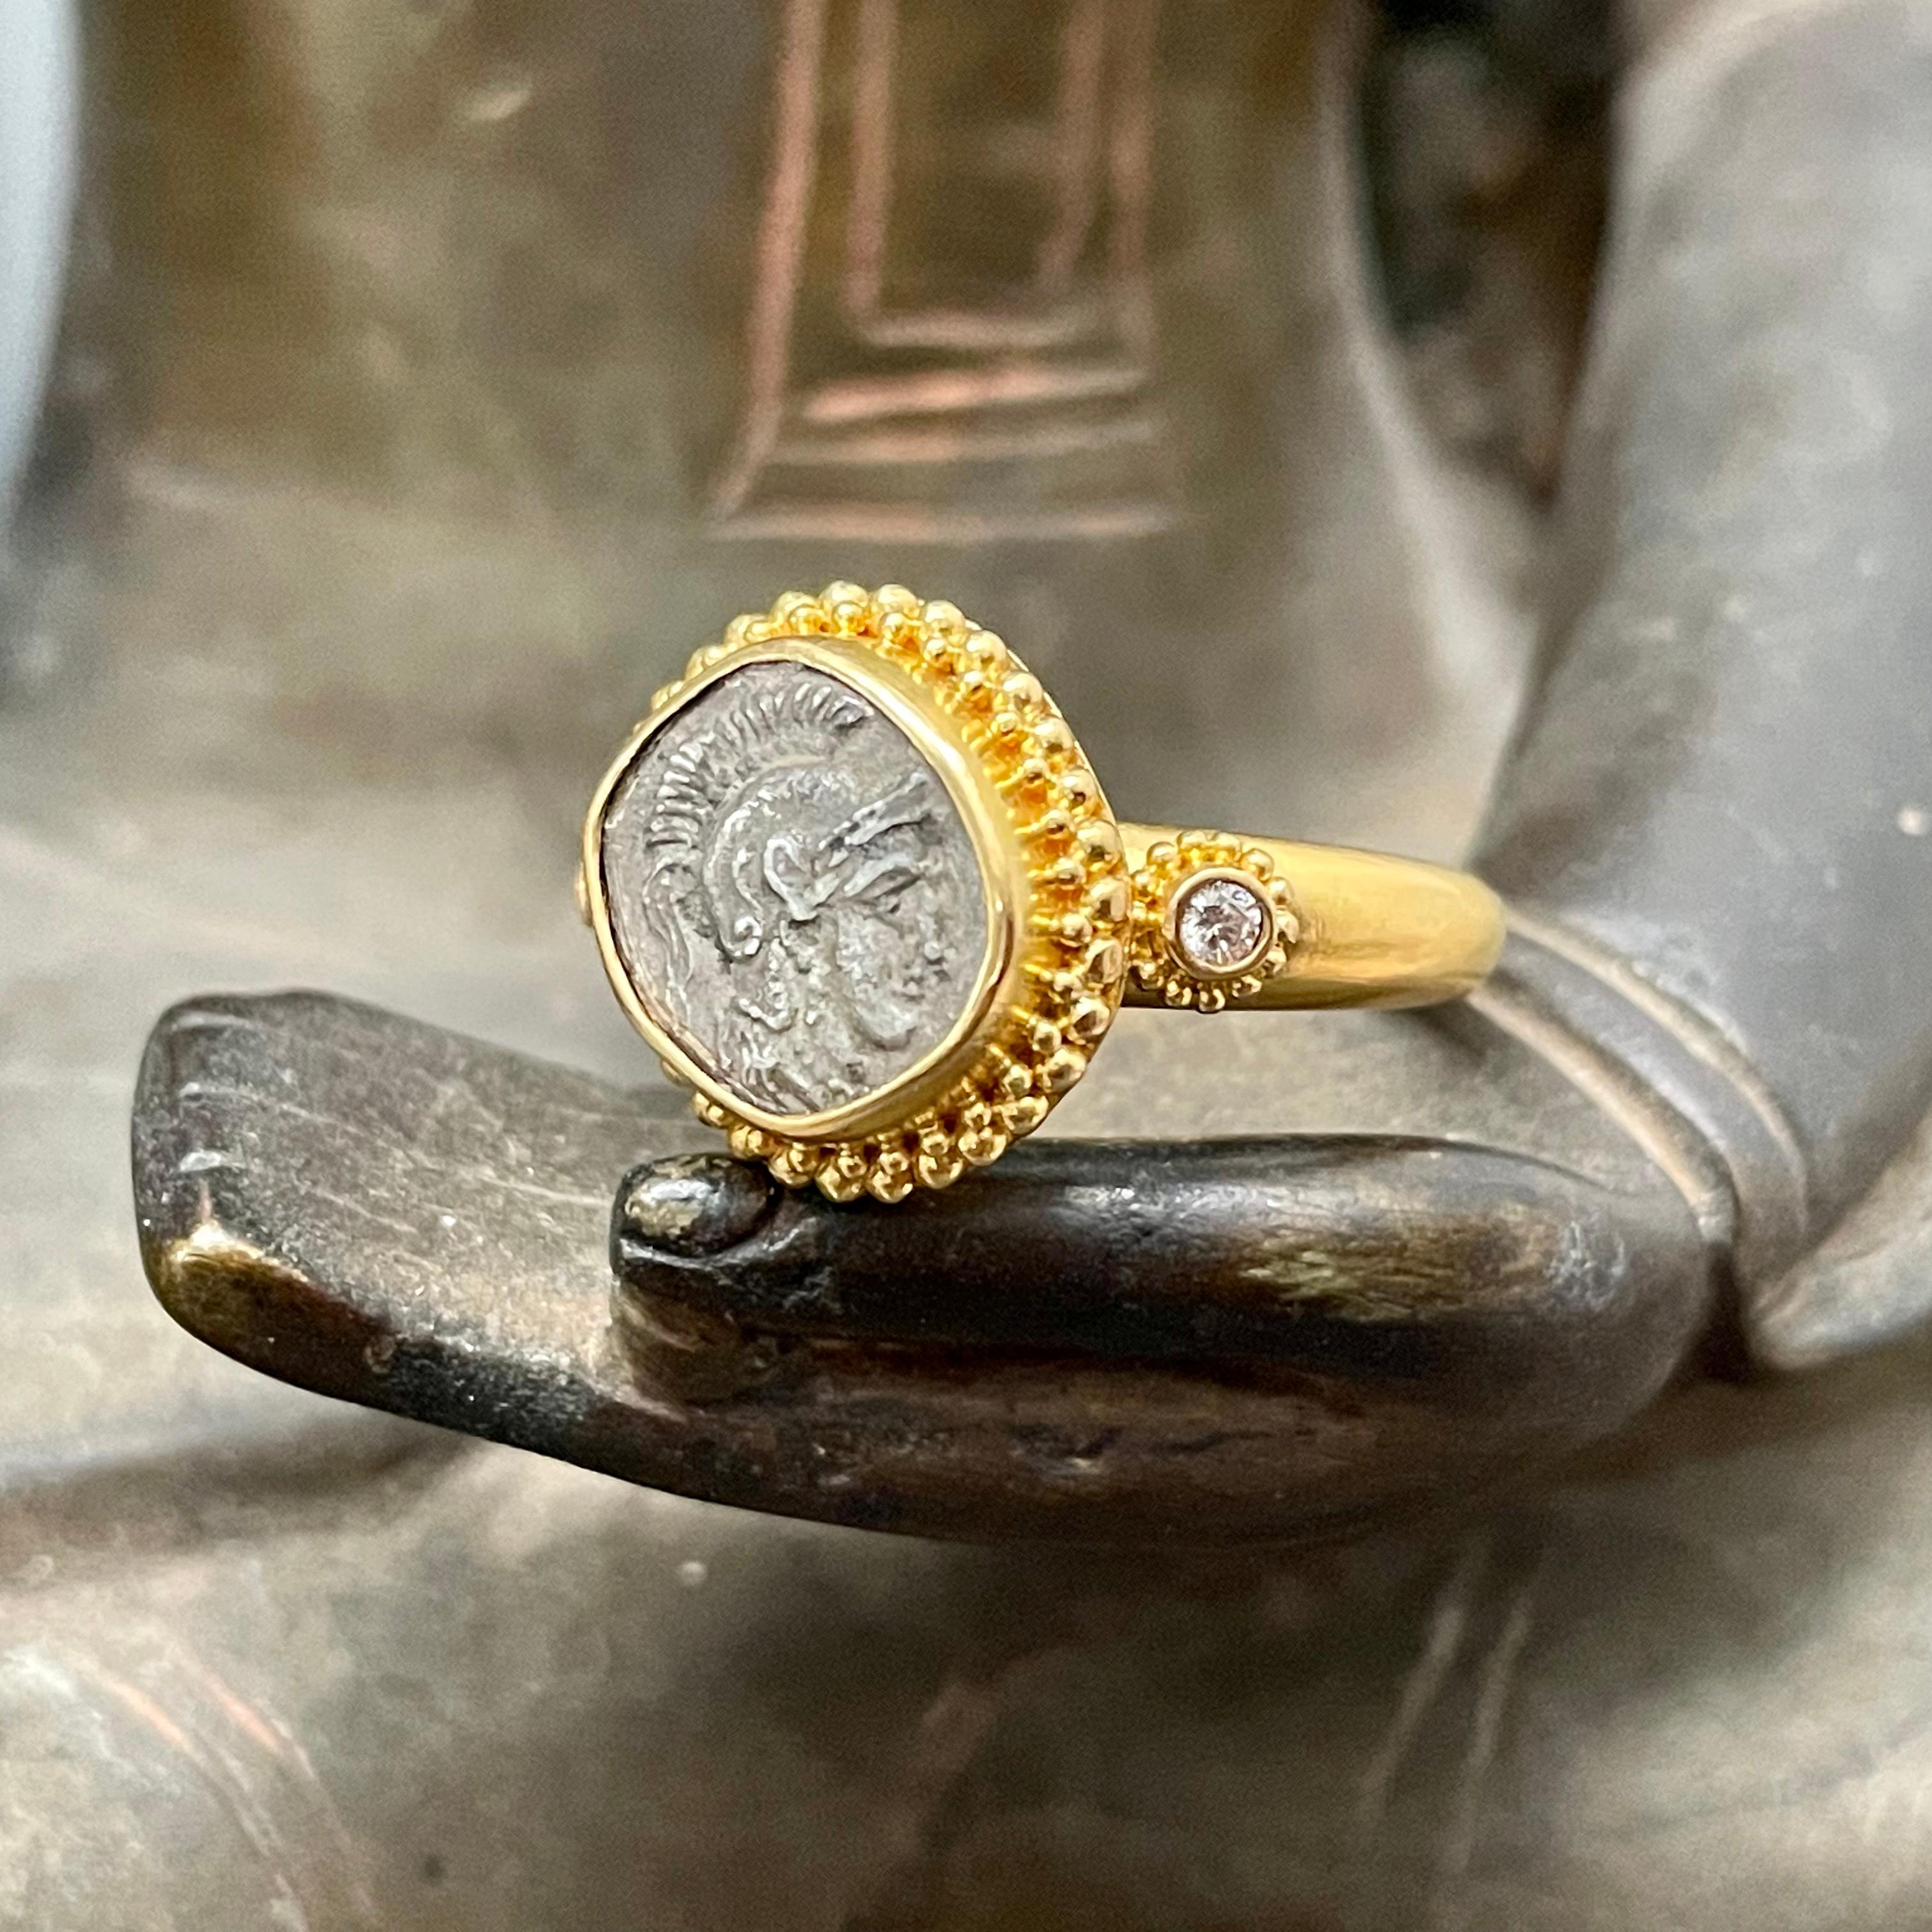 An authentic ancient Greek coin displaying a helmeted Athena from 333-323 BC is beautifully set in this Steven Battelle designed 22K gold ring. The coin is a silver 